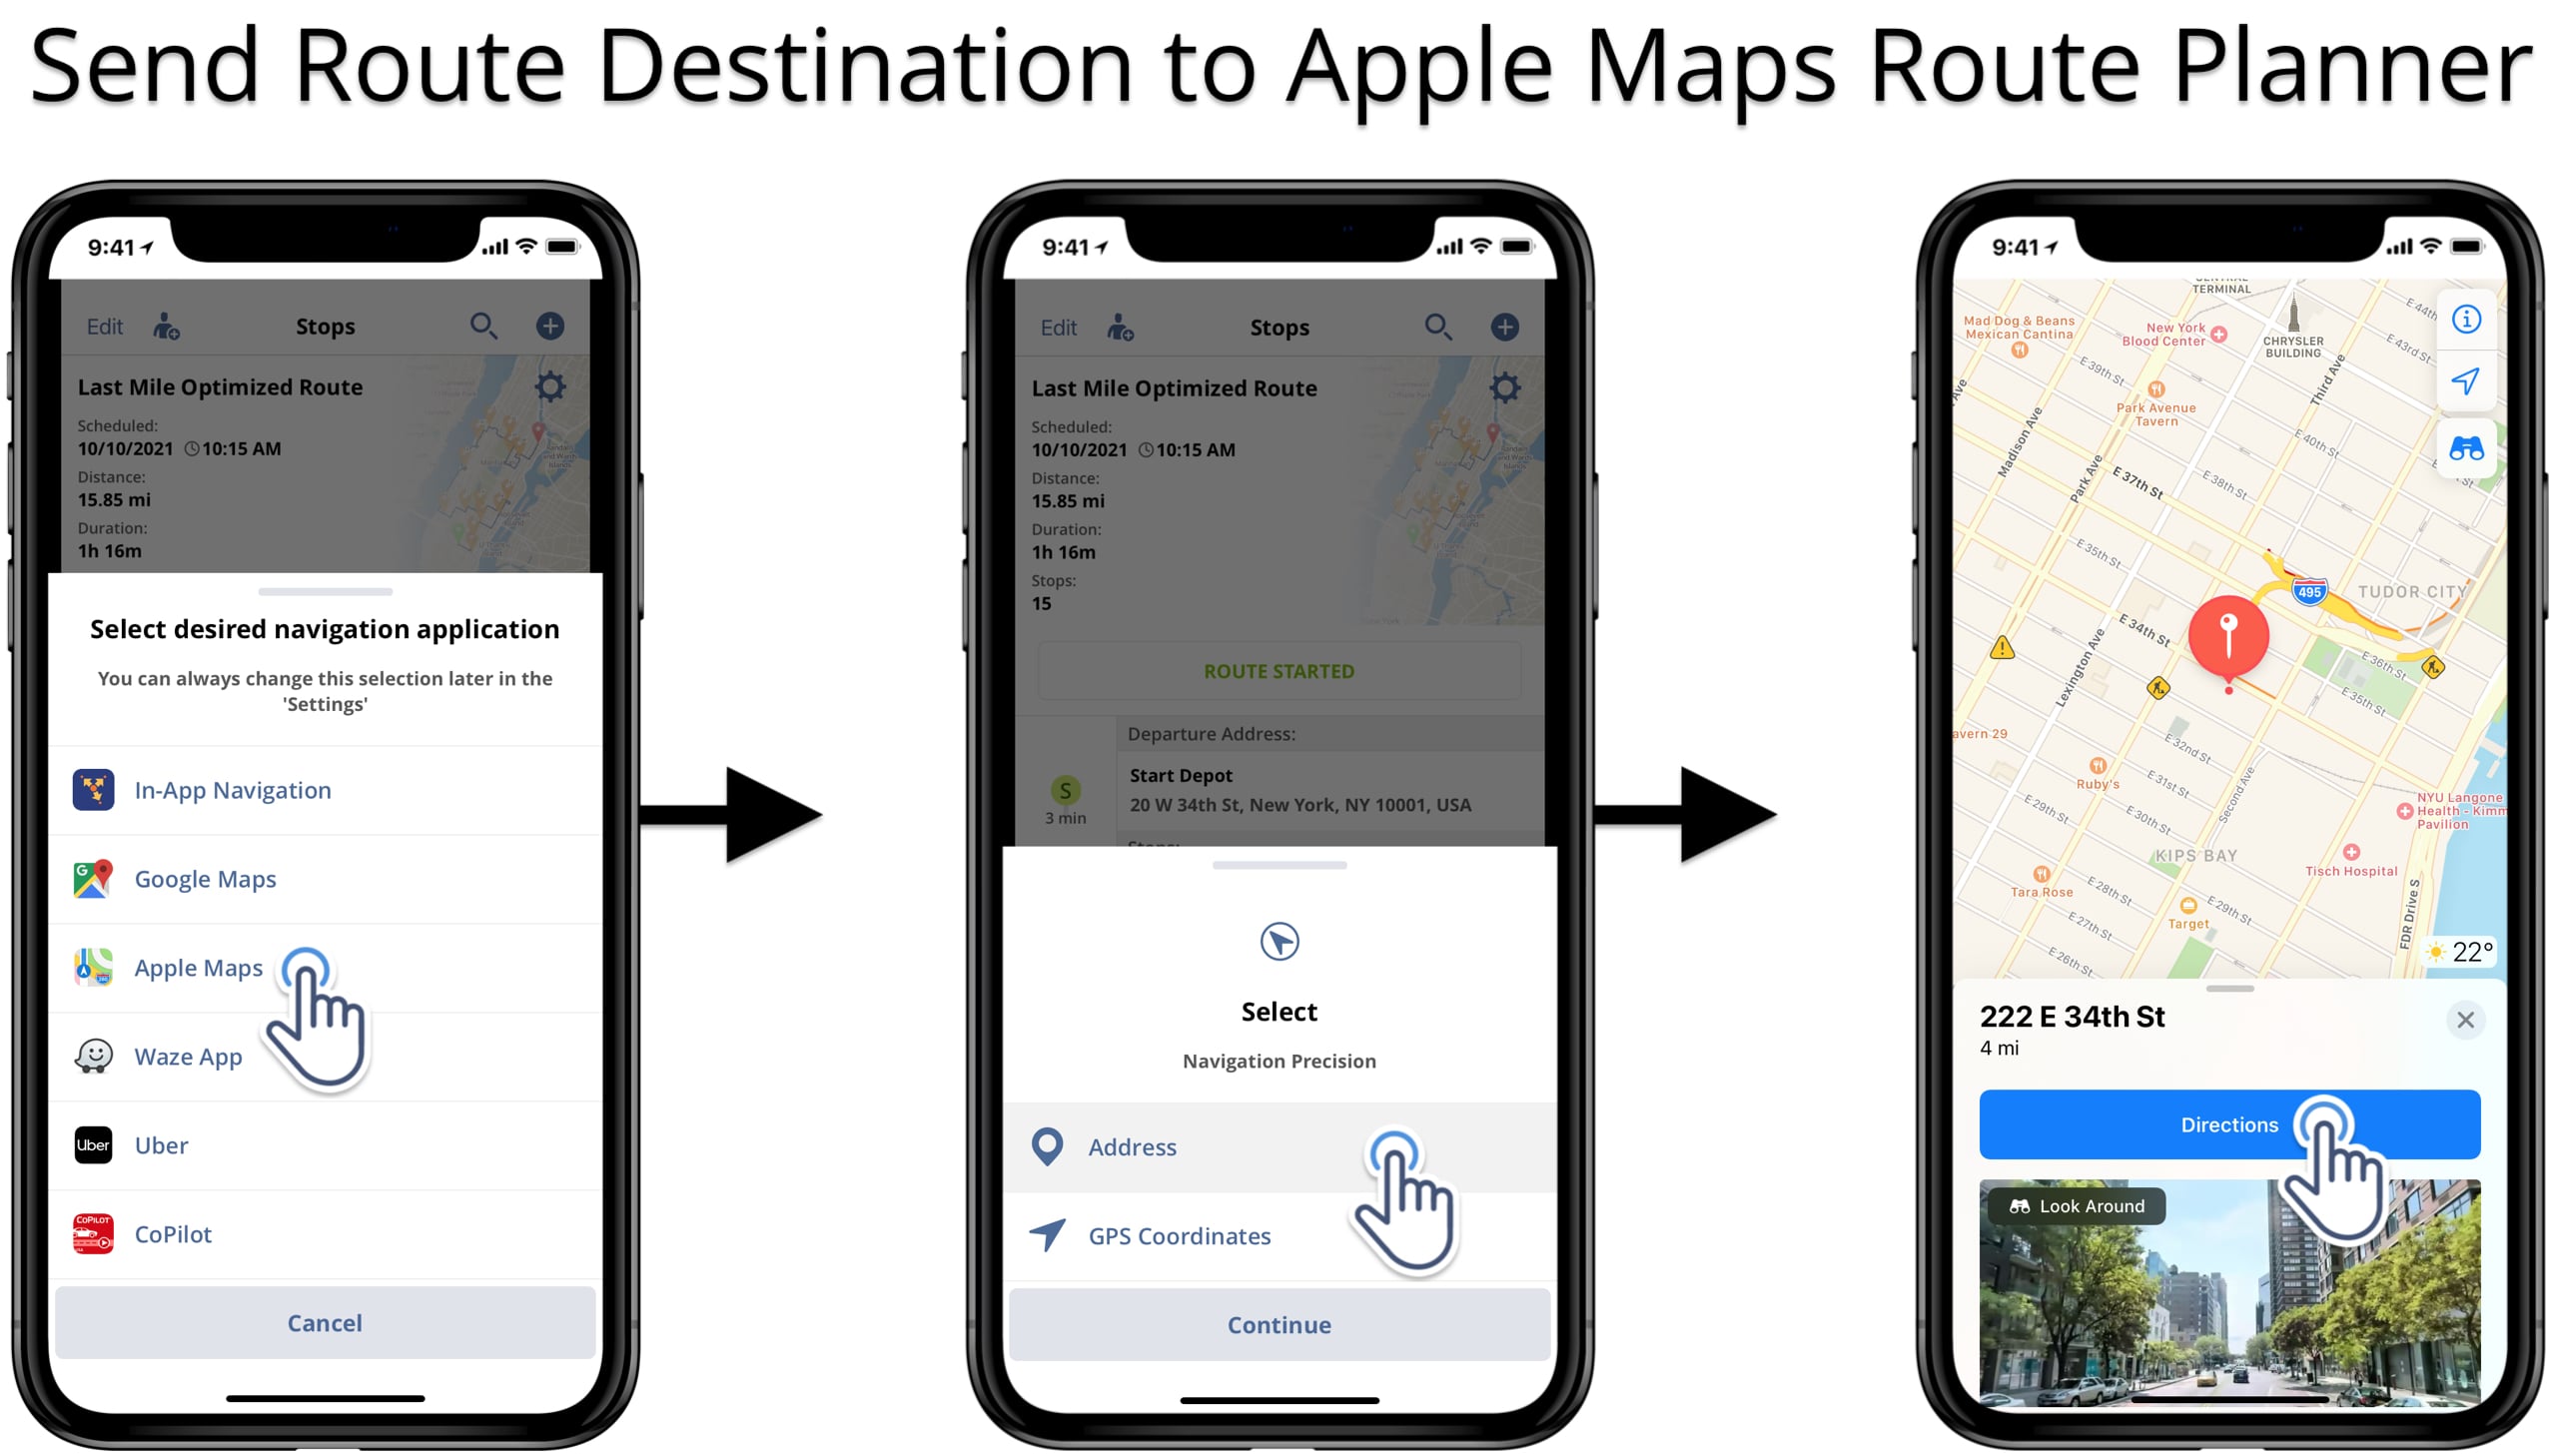 Send optimized route to the Apple Maps navigation app to get driving directions from Apple Maps.